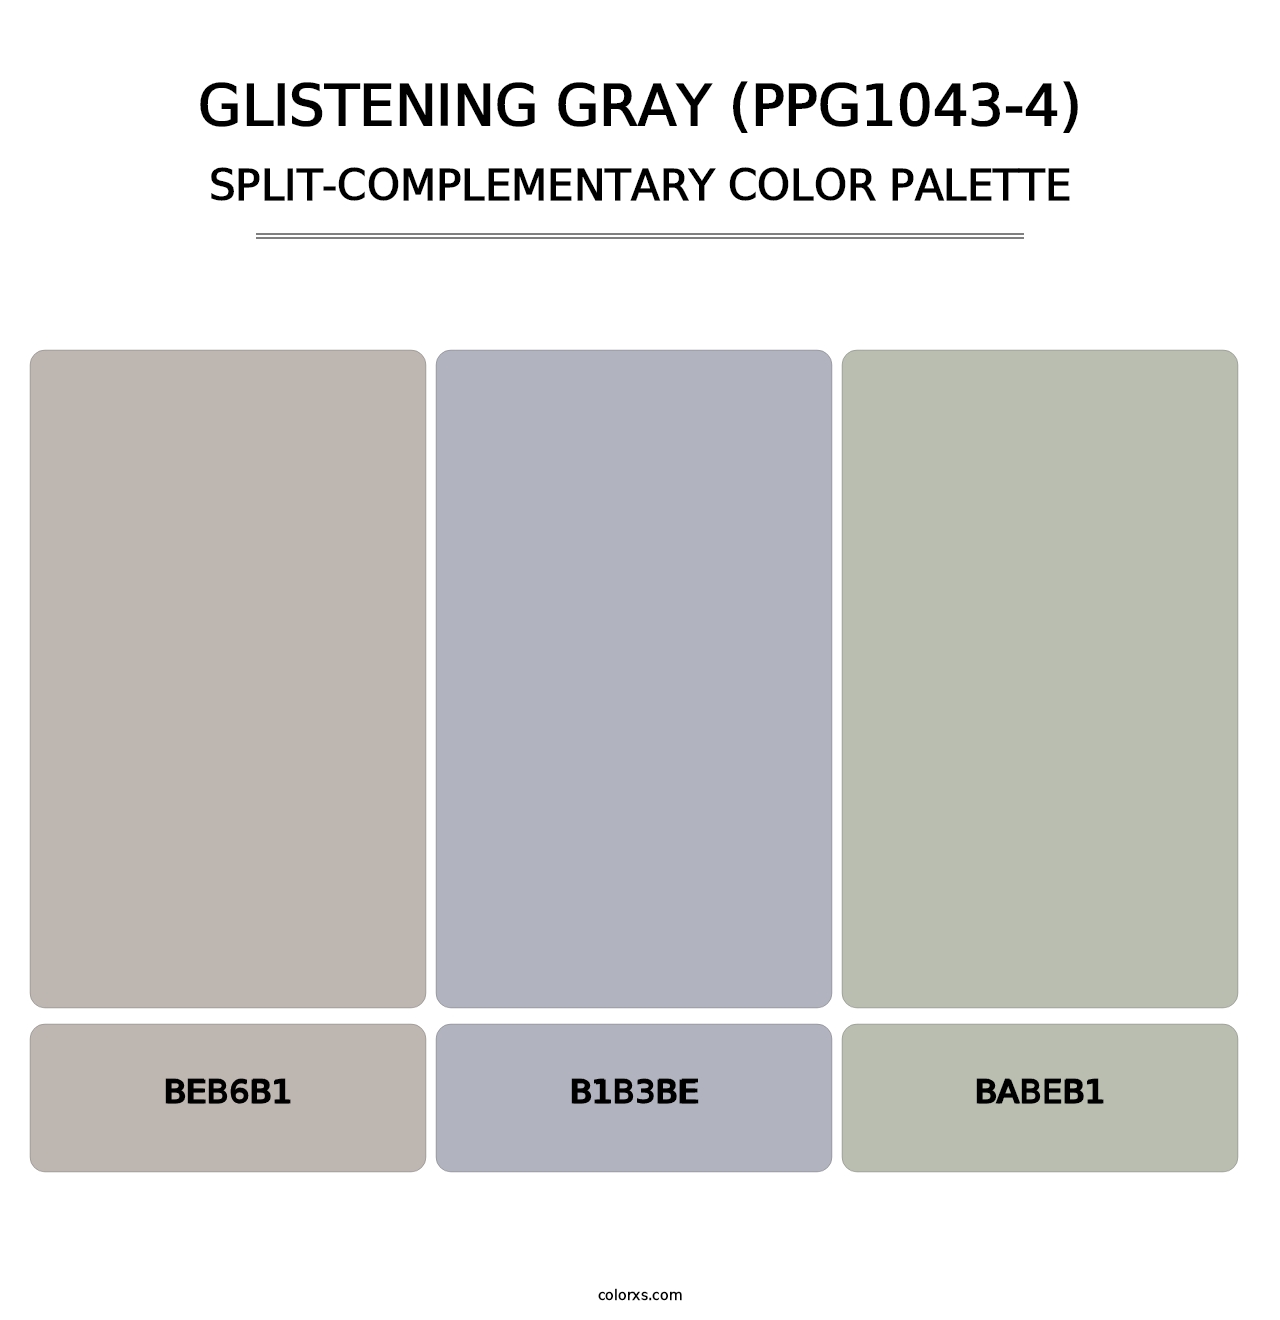 Glistening Gray (PPG1043-4) - Split-Complementary Color Palette